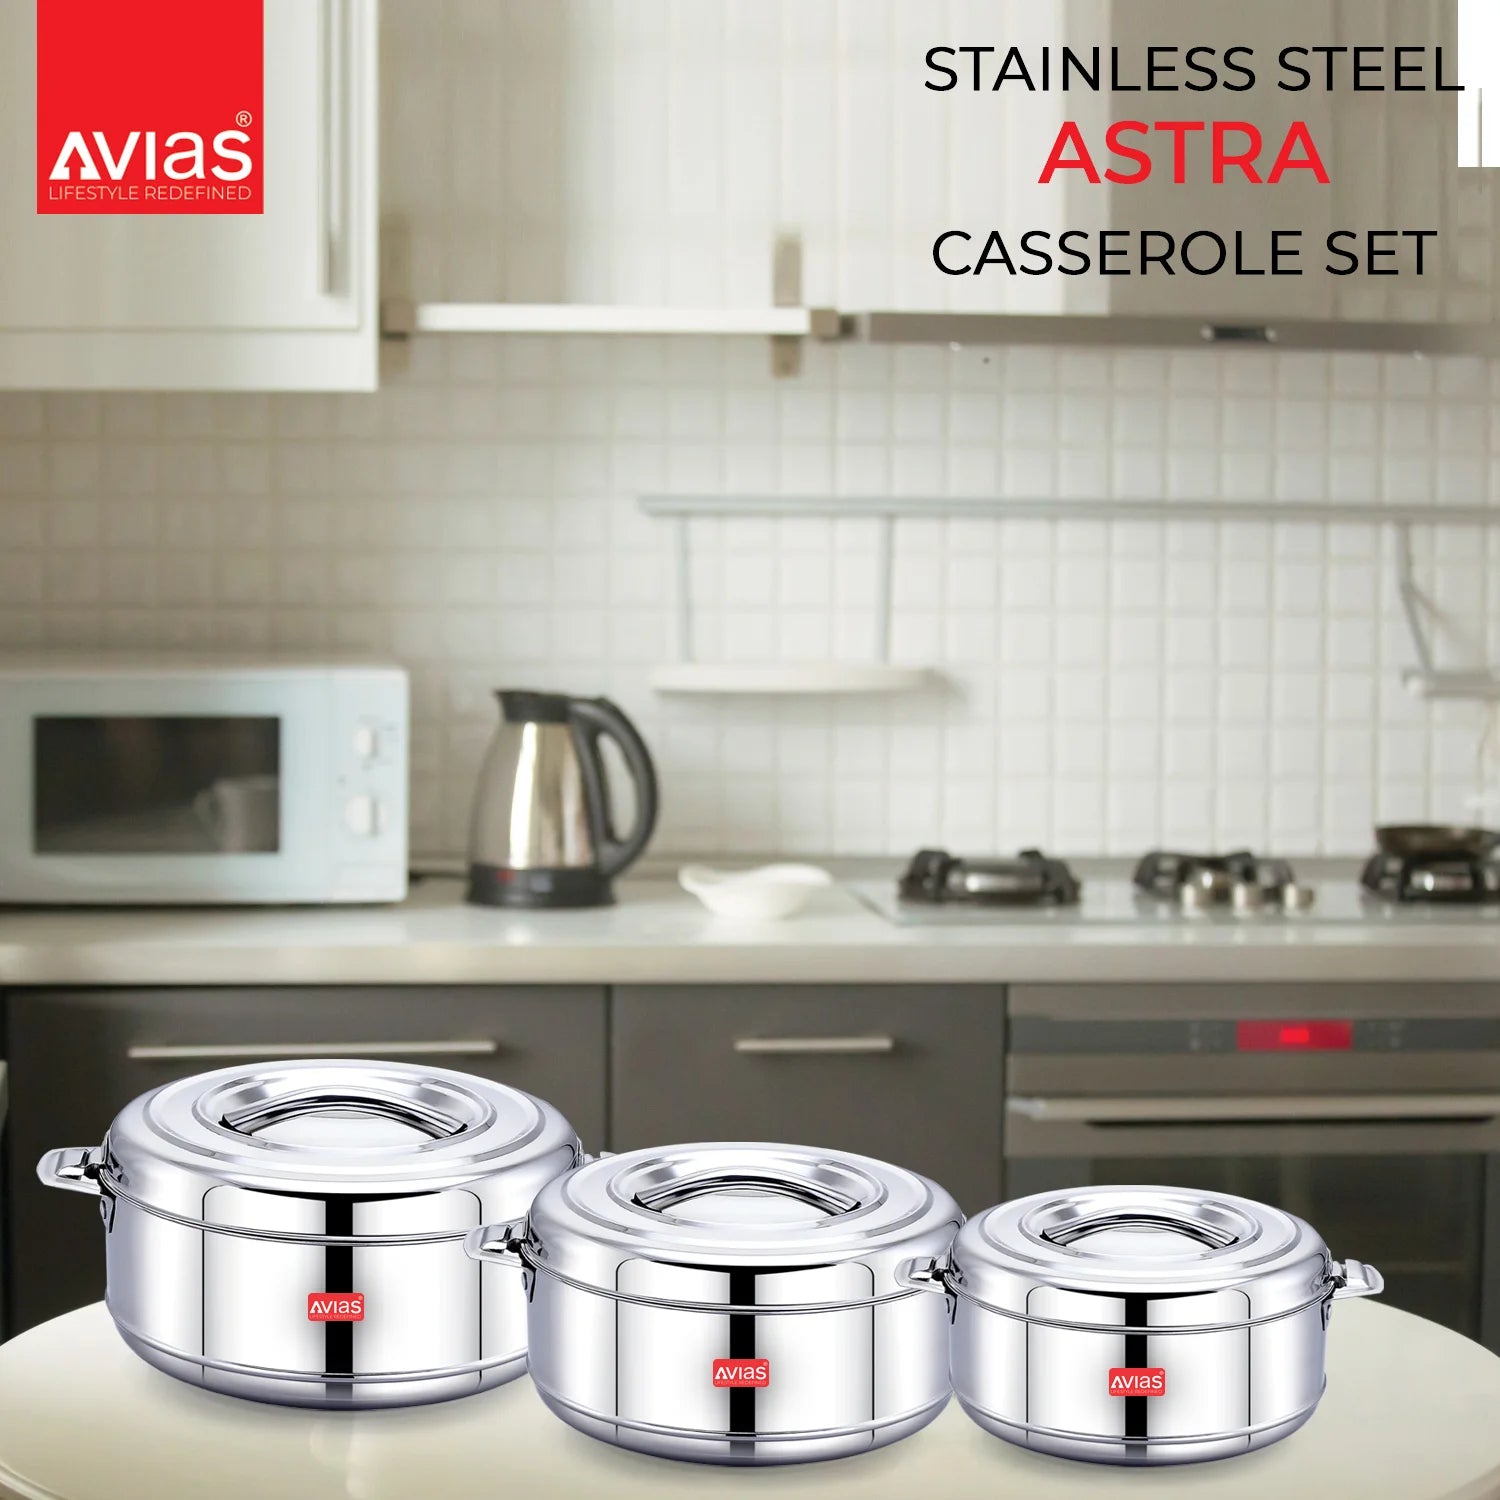 AVIAS Astra Stainless Steel Casserole set of 3 for storing food